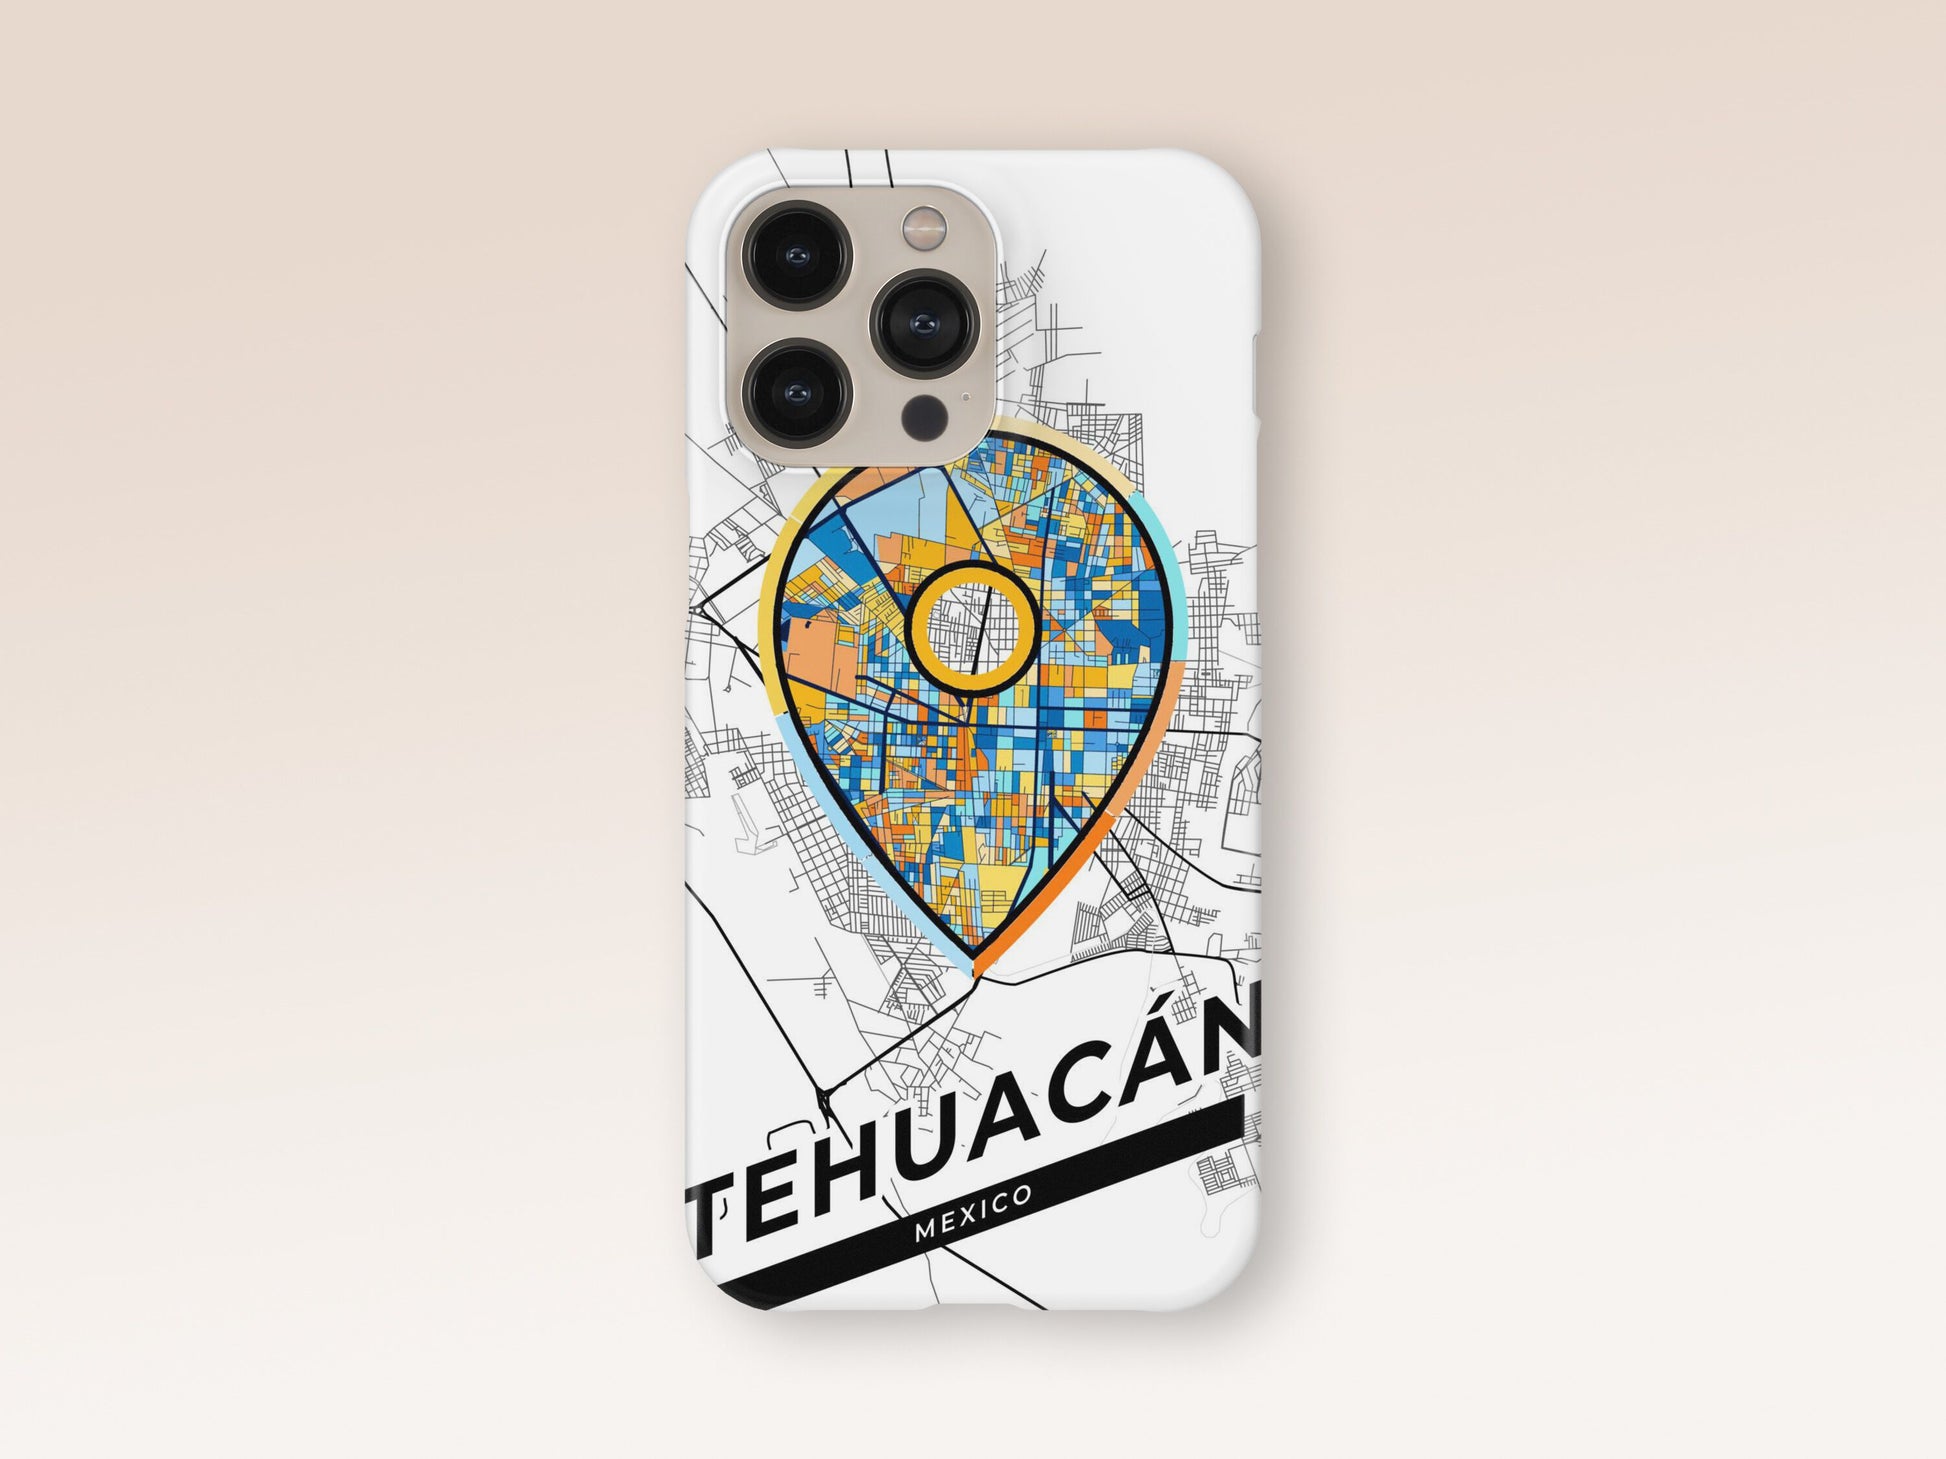 Tehuacán Mexico slim phone case with colorful icon 1